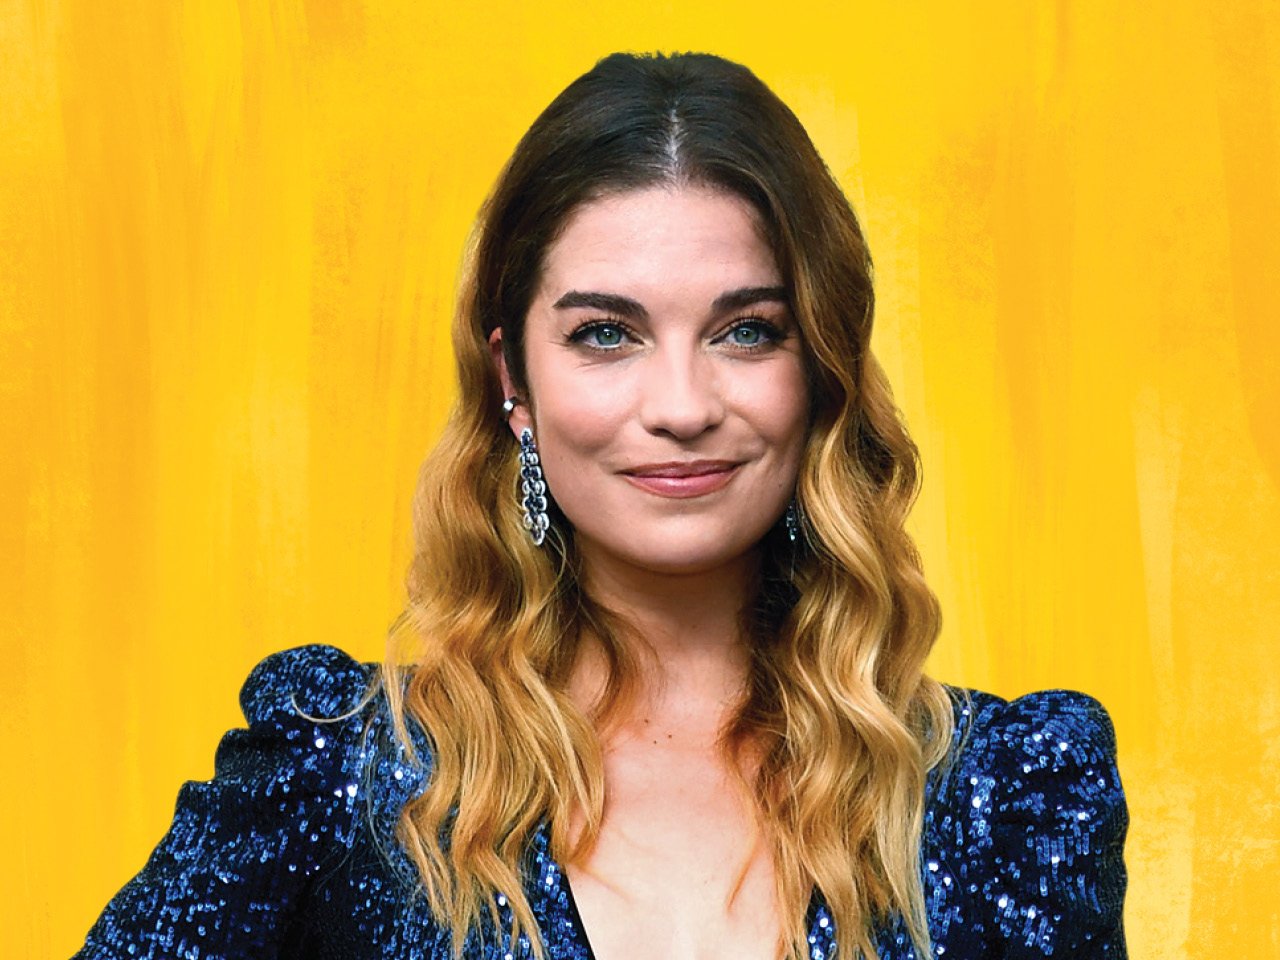 A photo of actor Annie Murphy in a blue sequinned dress on a yellow backdrop